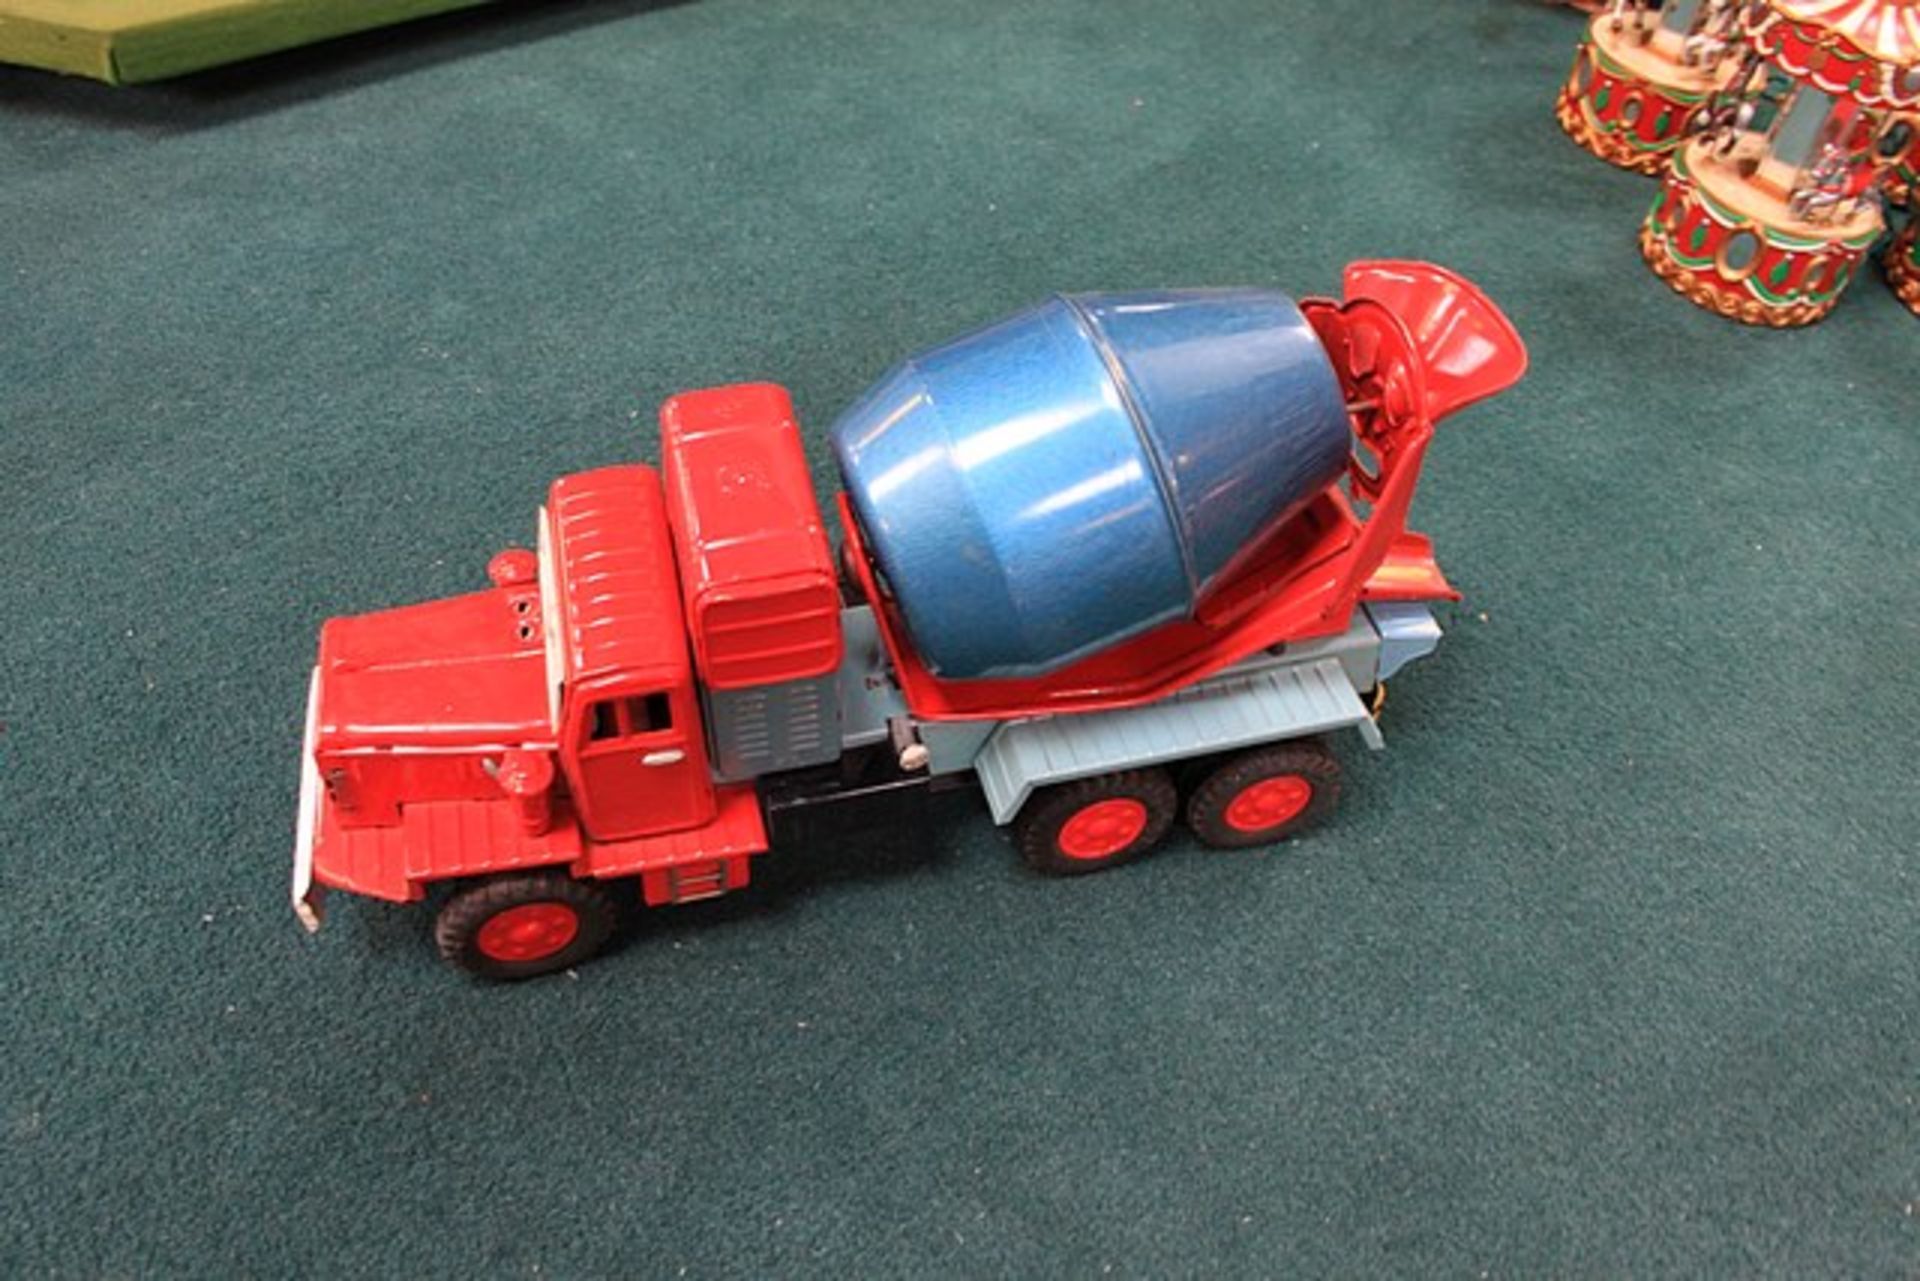 Cragstan Tin Toy Rotating Concrete Mixer On Heavy Duty Diesel Truck With Push-Button Hydraulic - Image 2 of 2